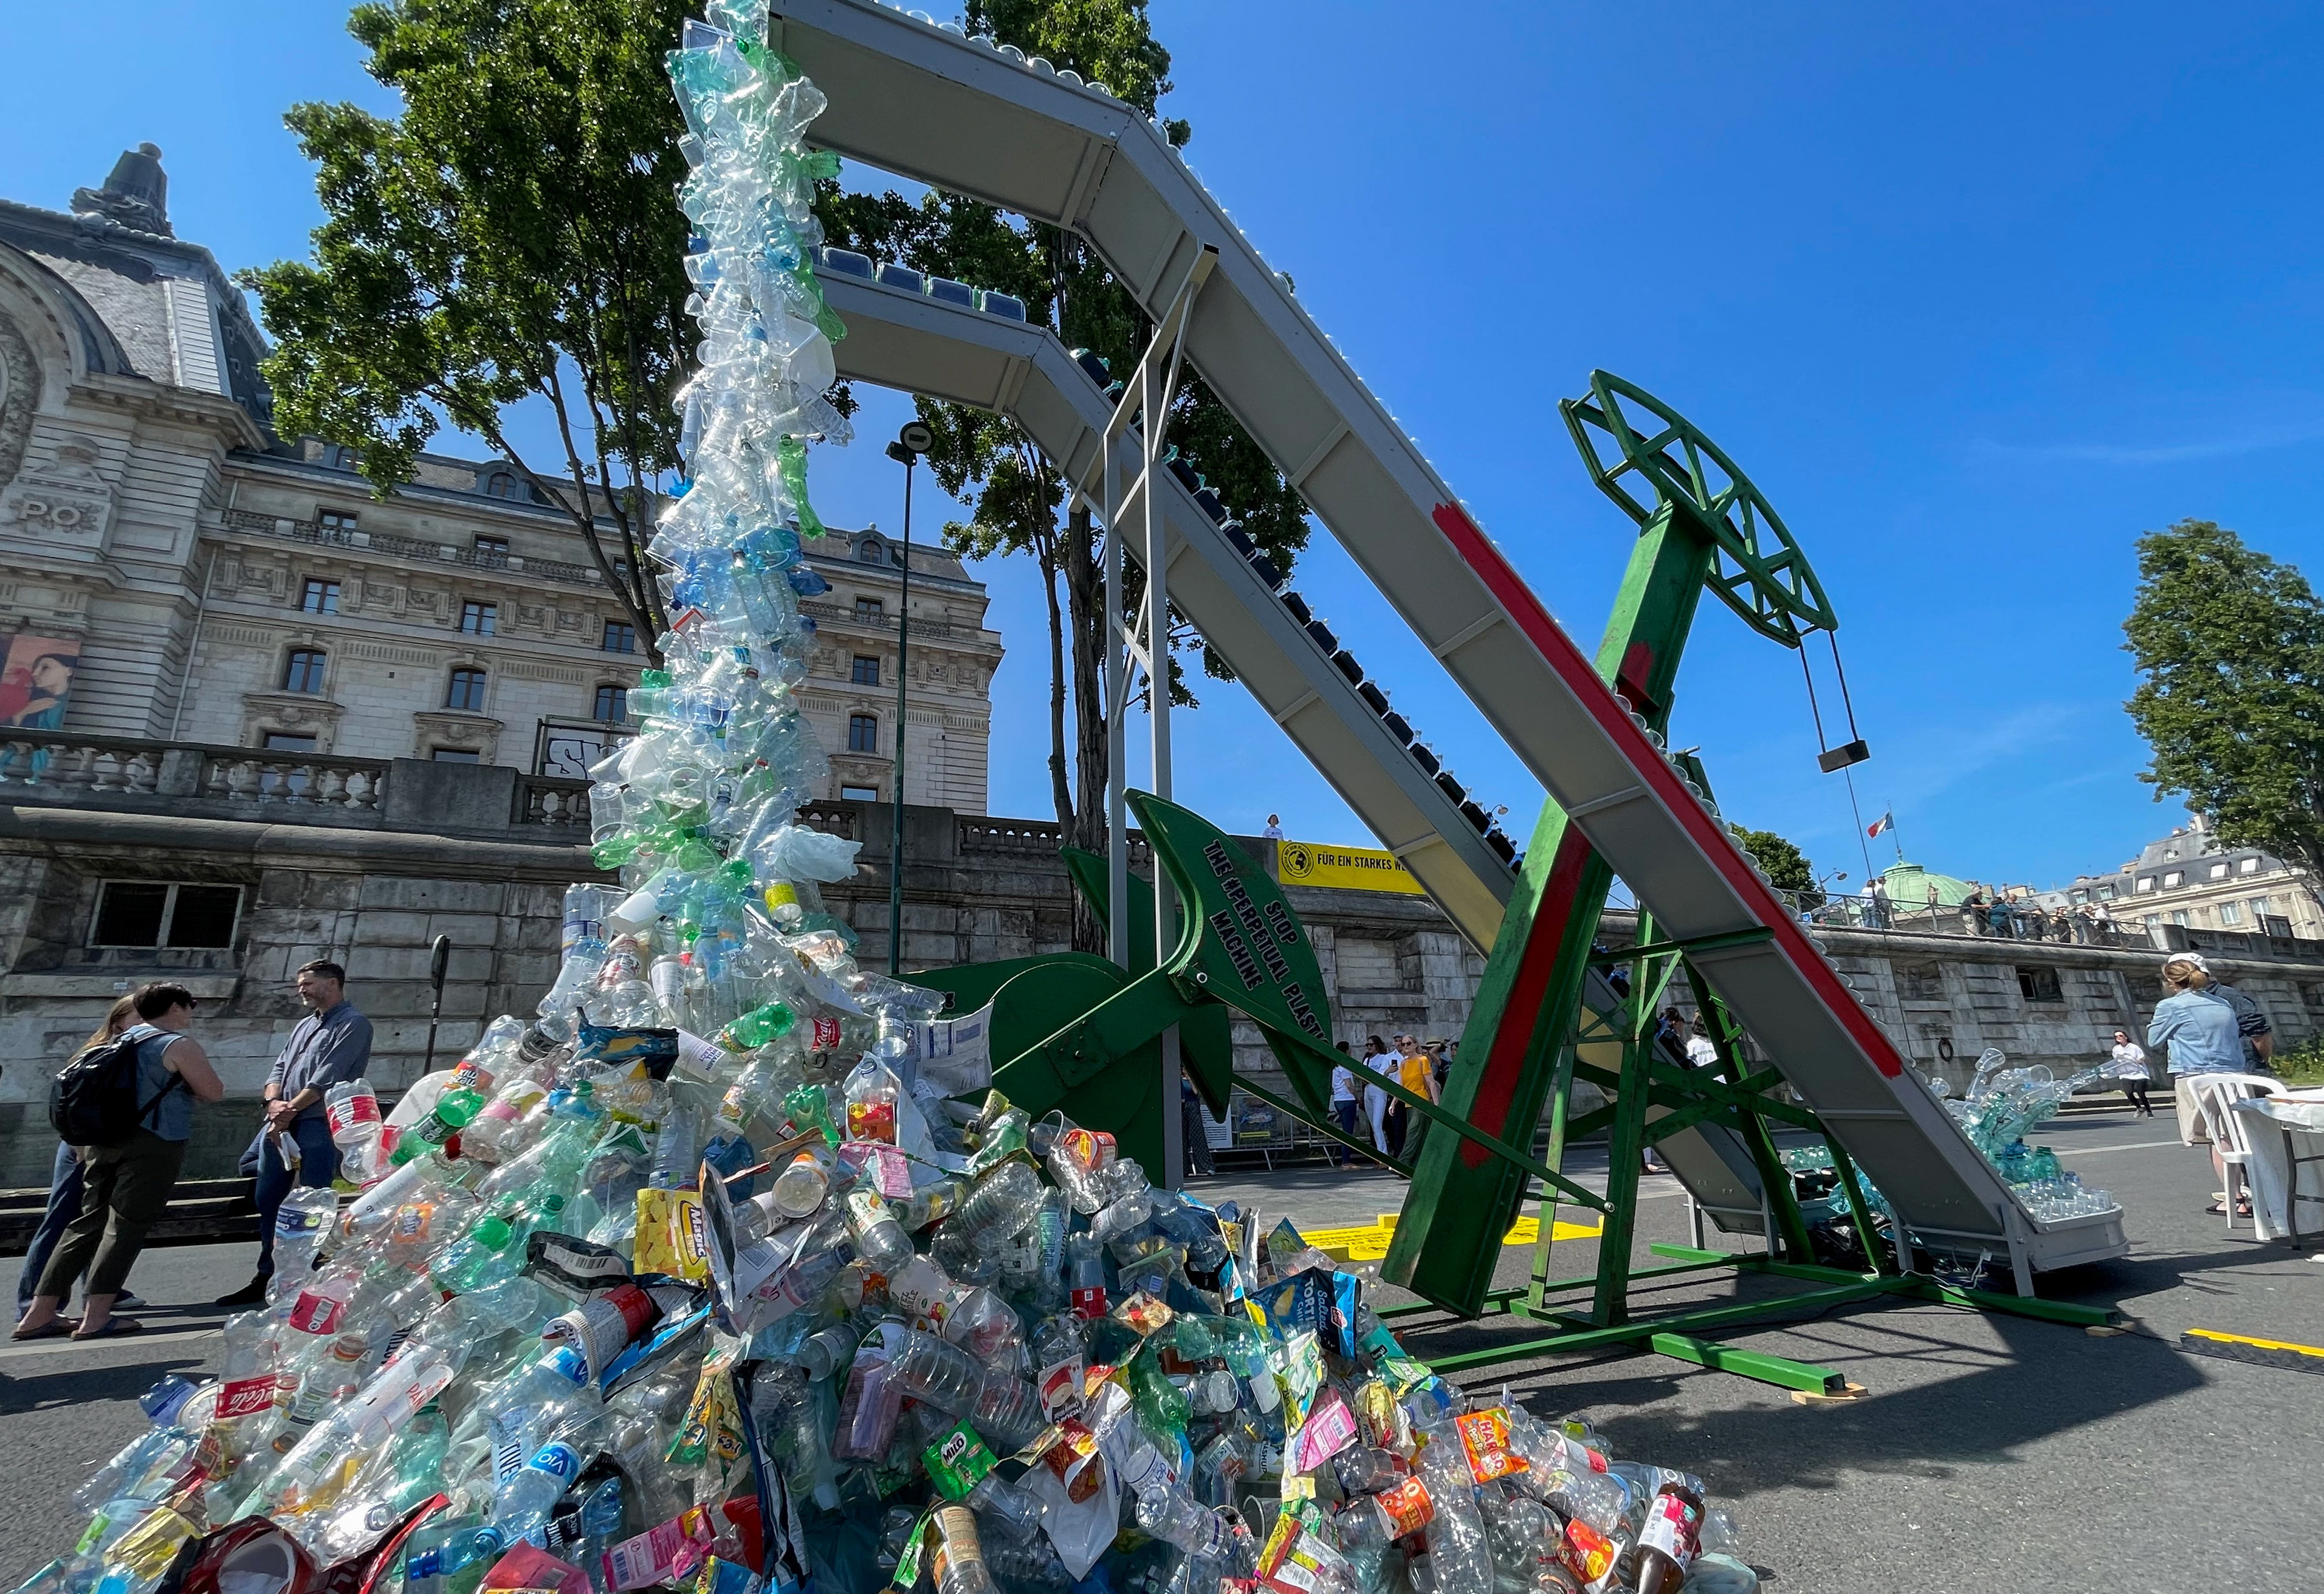 Greenpeace International unveils an art installation by artist Benjamin Von Wong, ahead of a United Nations Environment Programme summit on reducing plastic pollution, in Paris